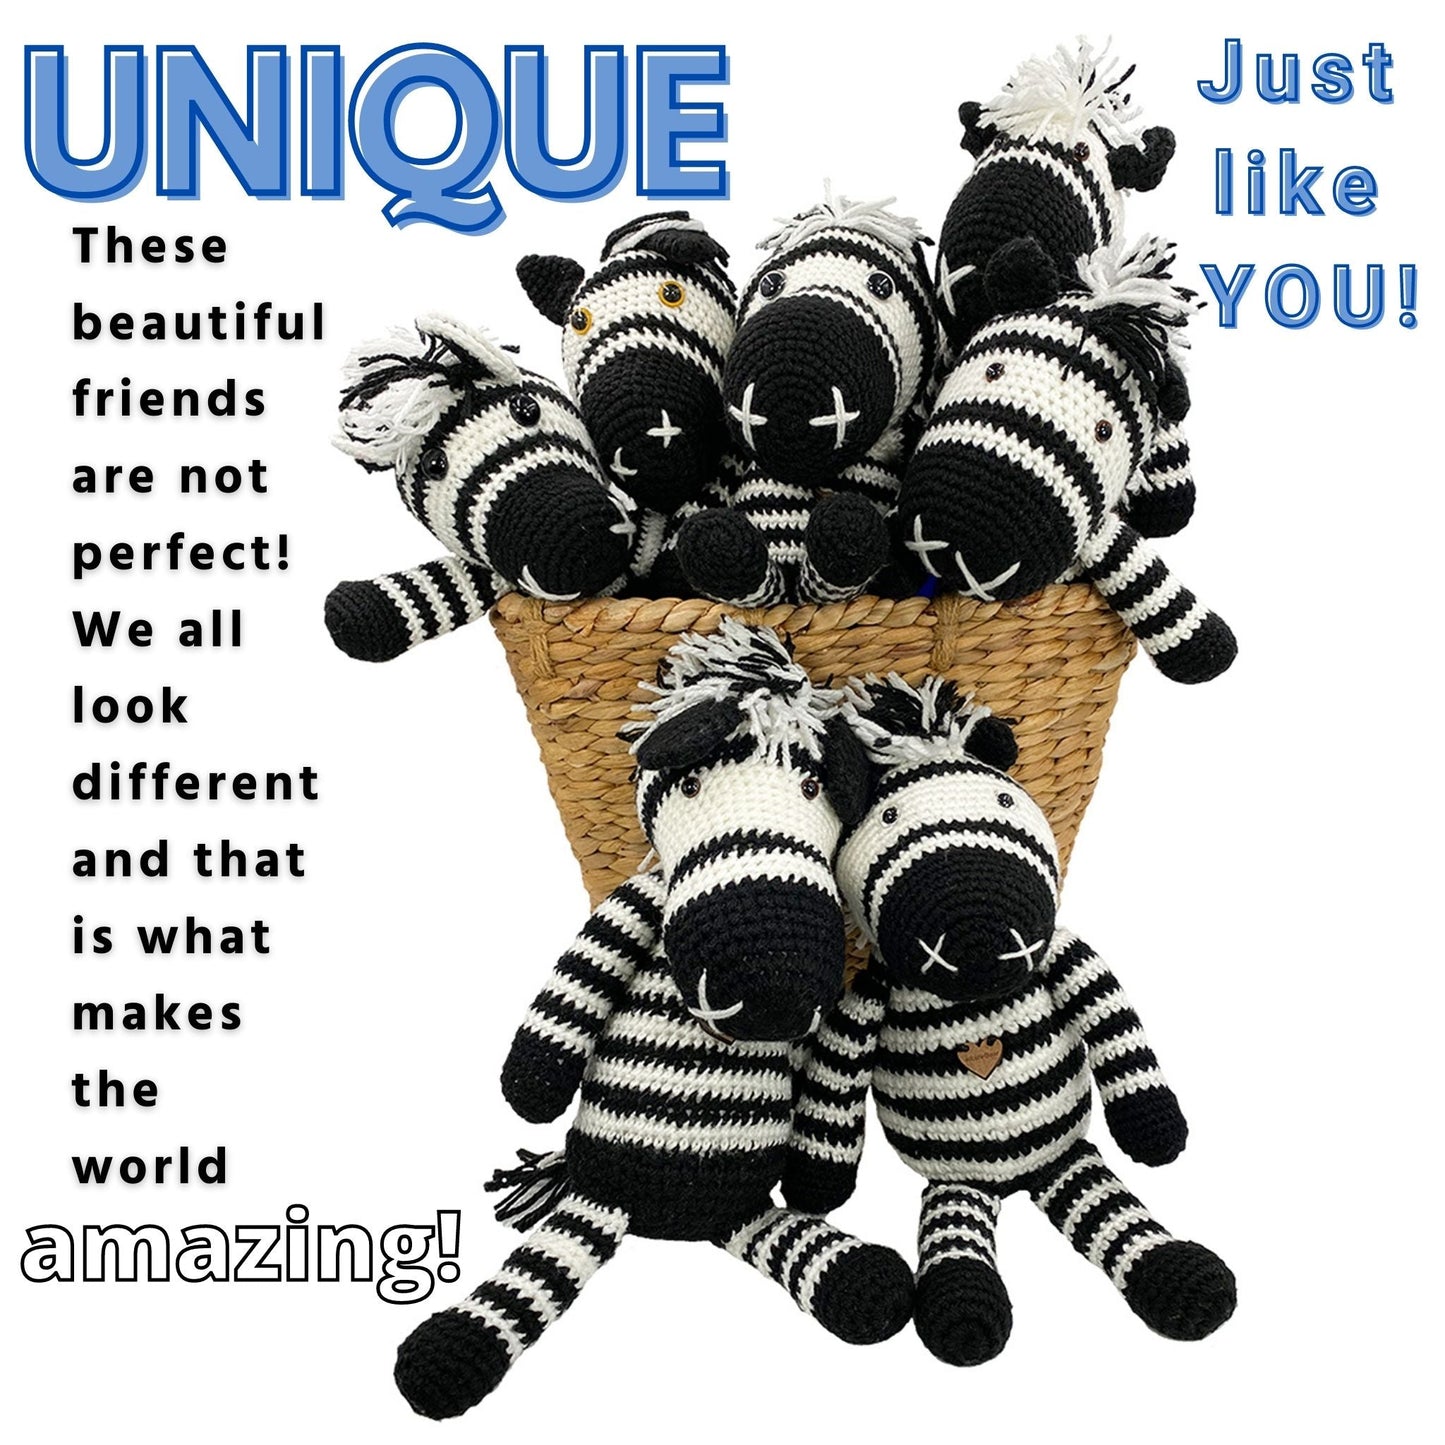 Zebra - Handmade in South Africa by the ladies from Rare Bears Charity